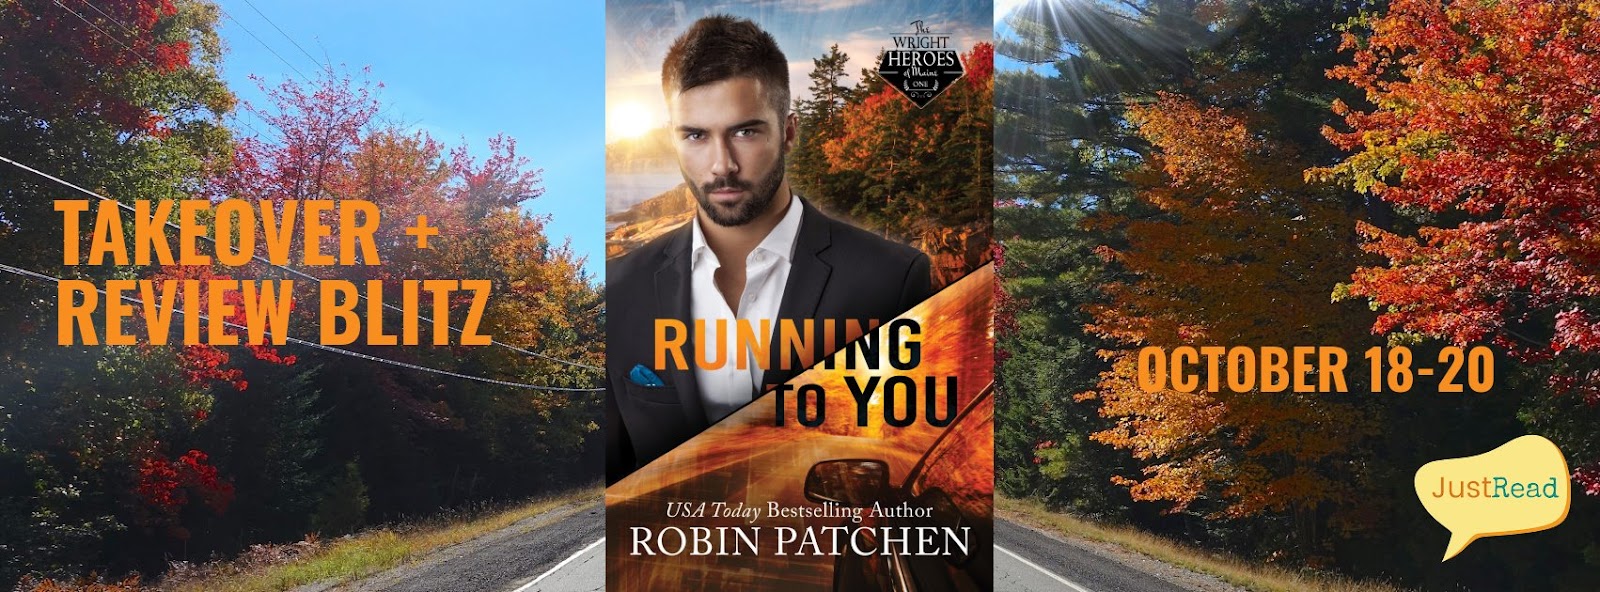 Running to You JustRead Takeover + Review Blitz